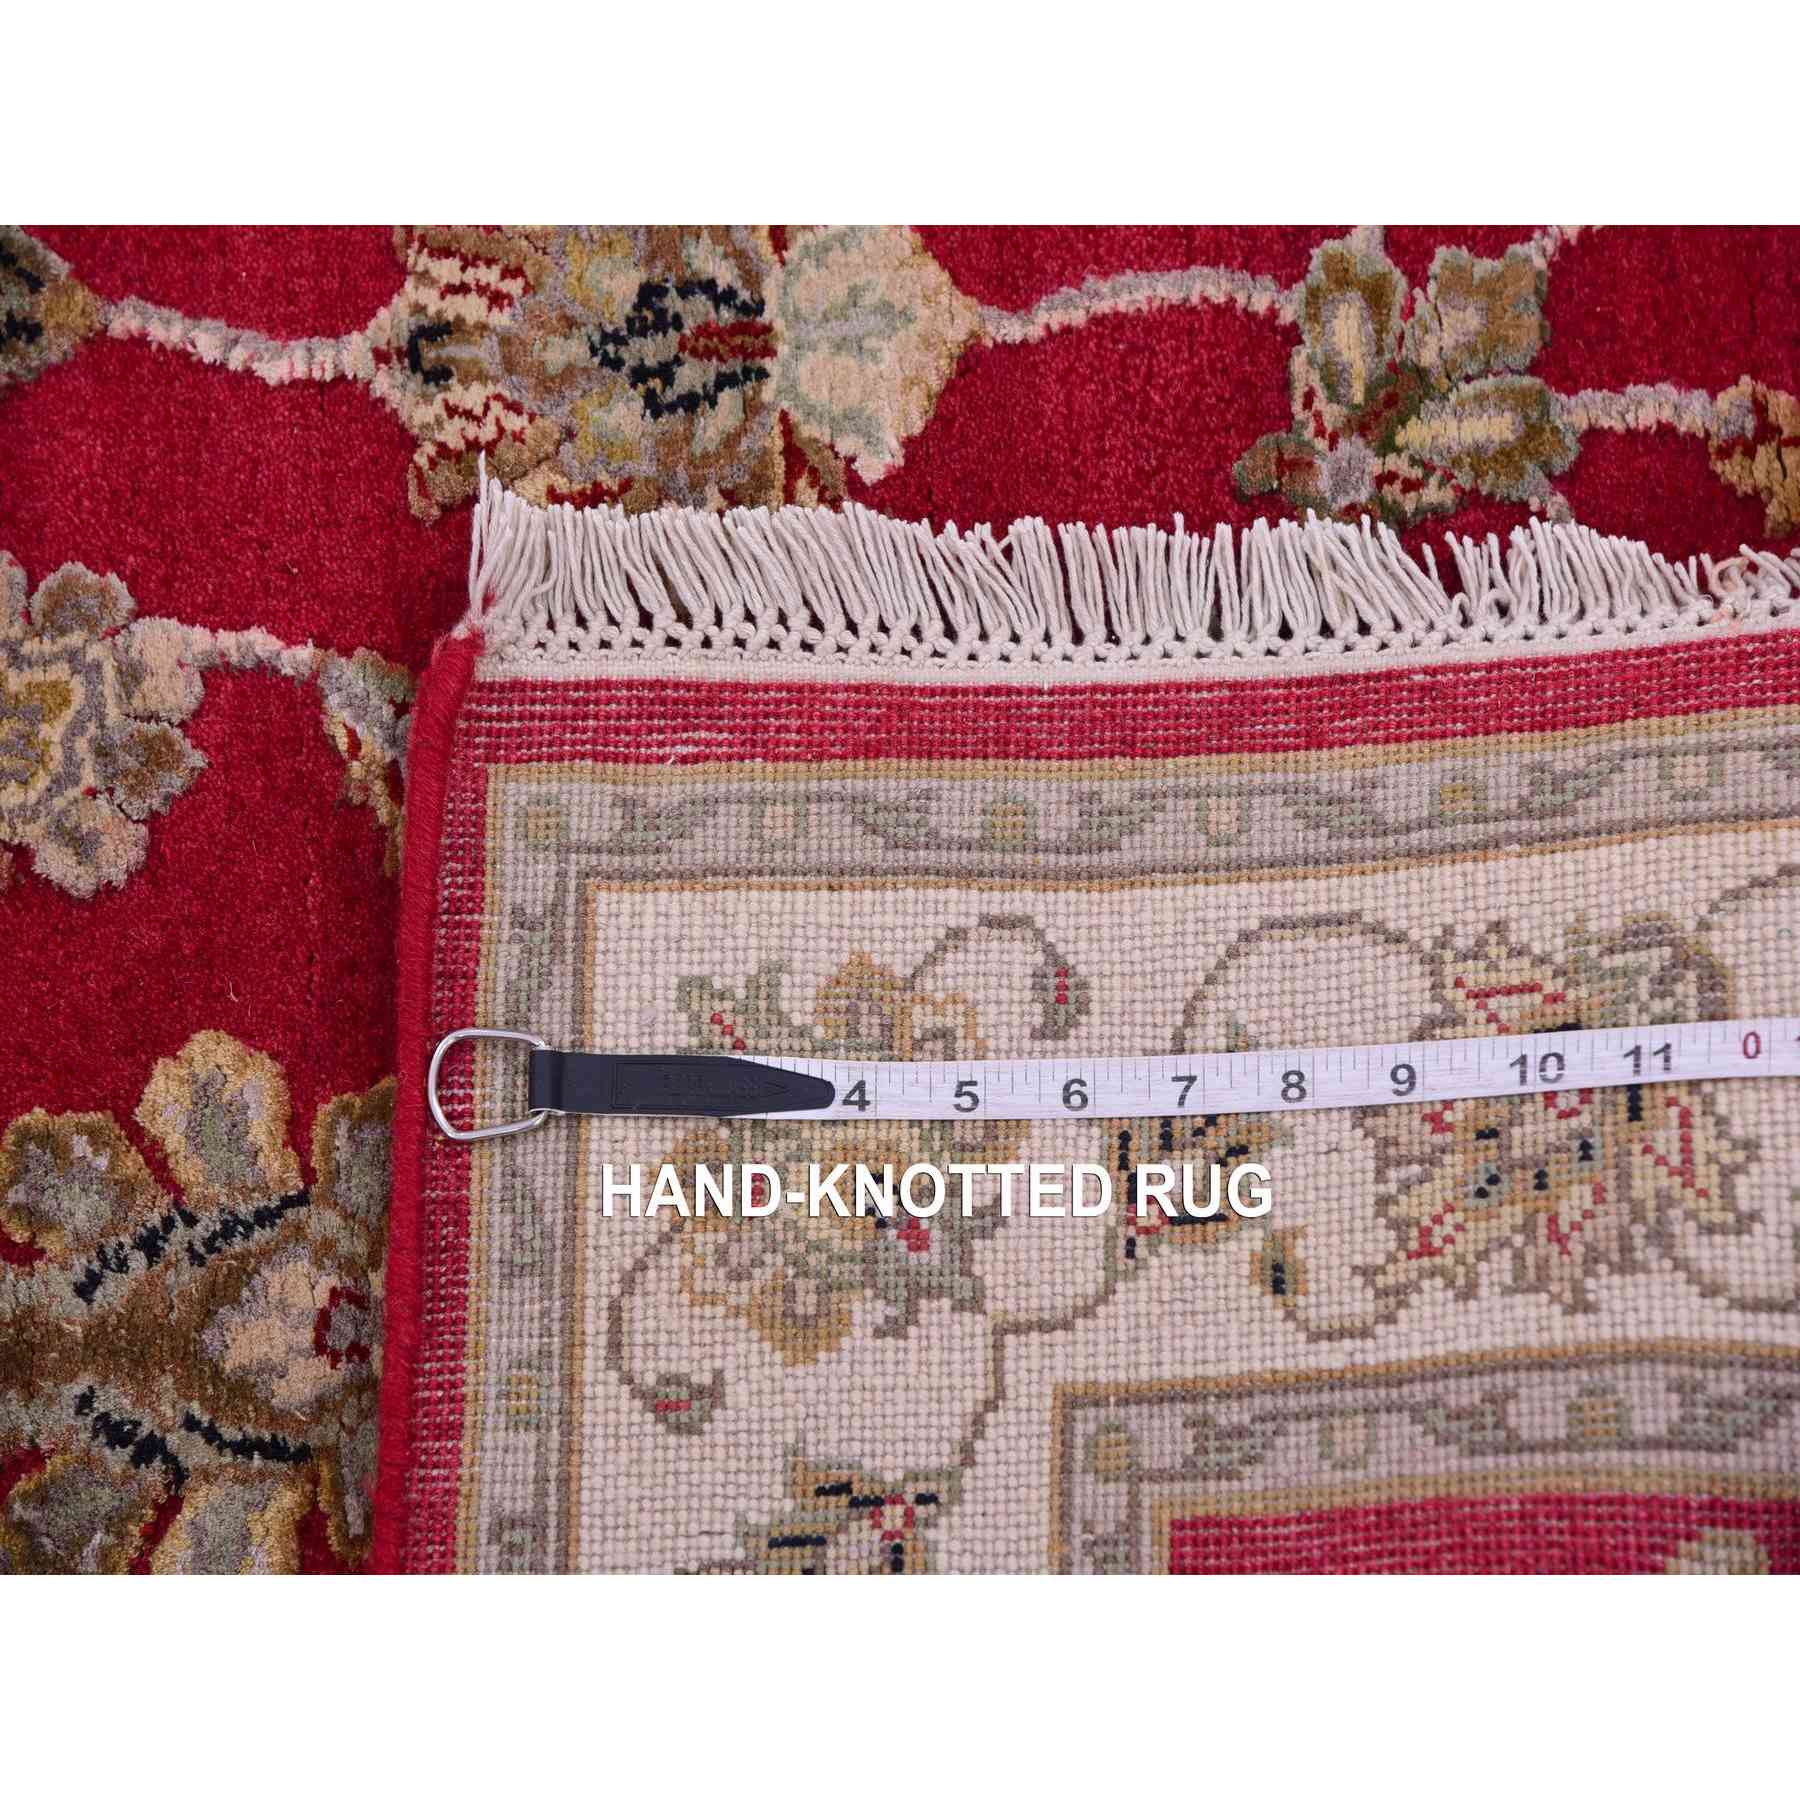 Rajasthan-Hand-Knotted-Rug-377020